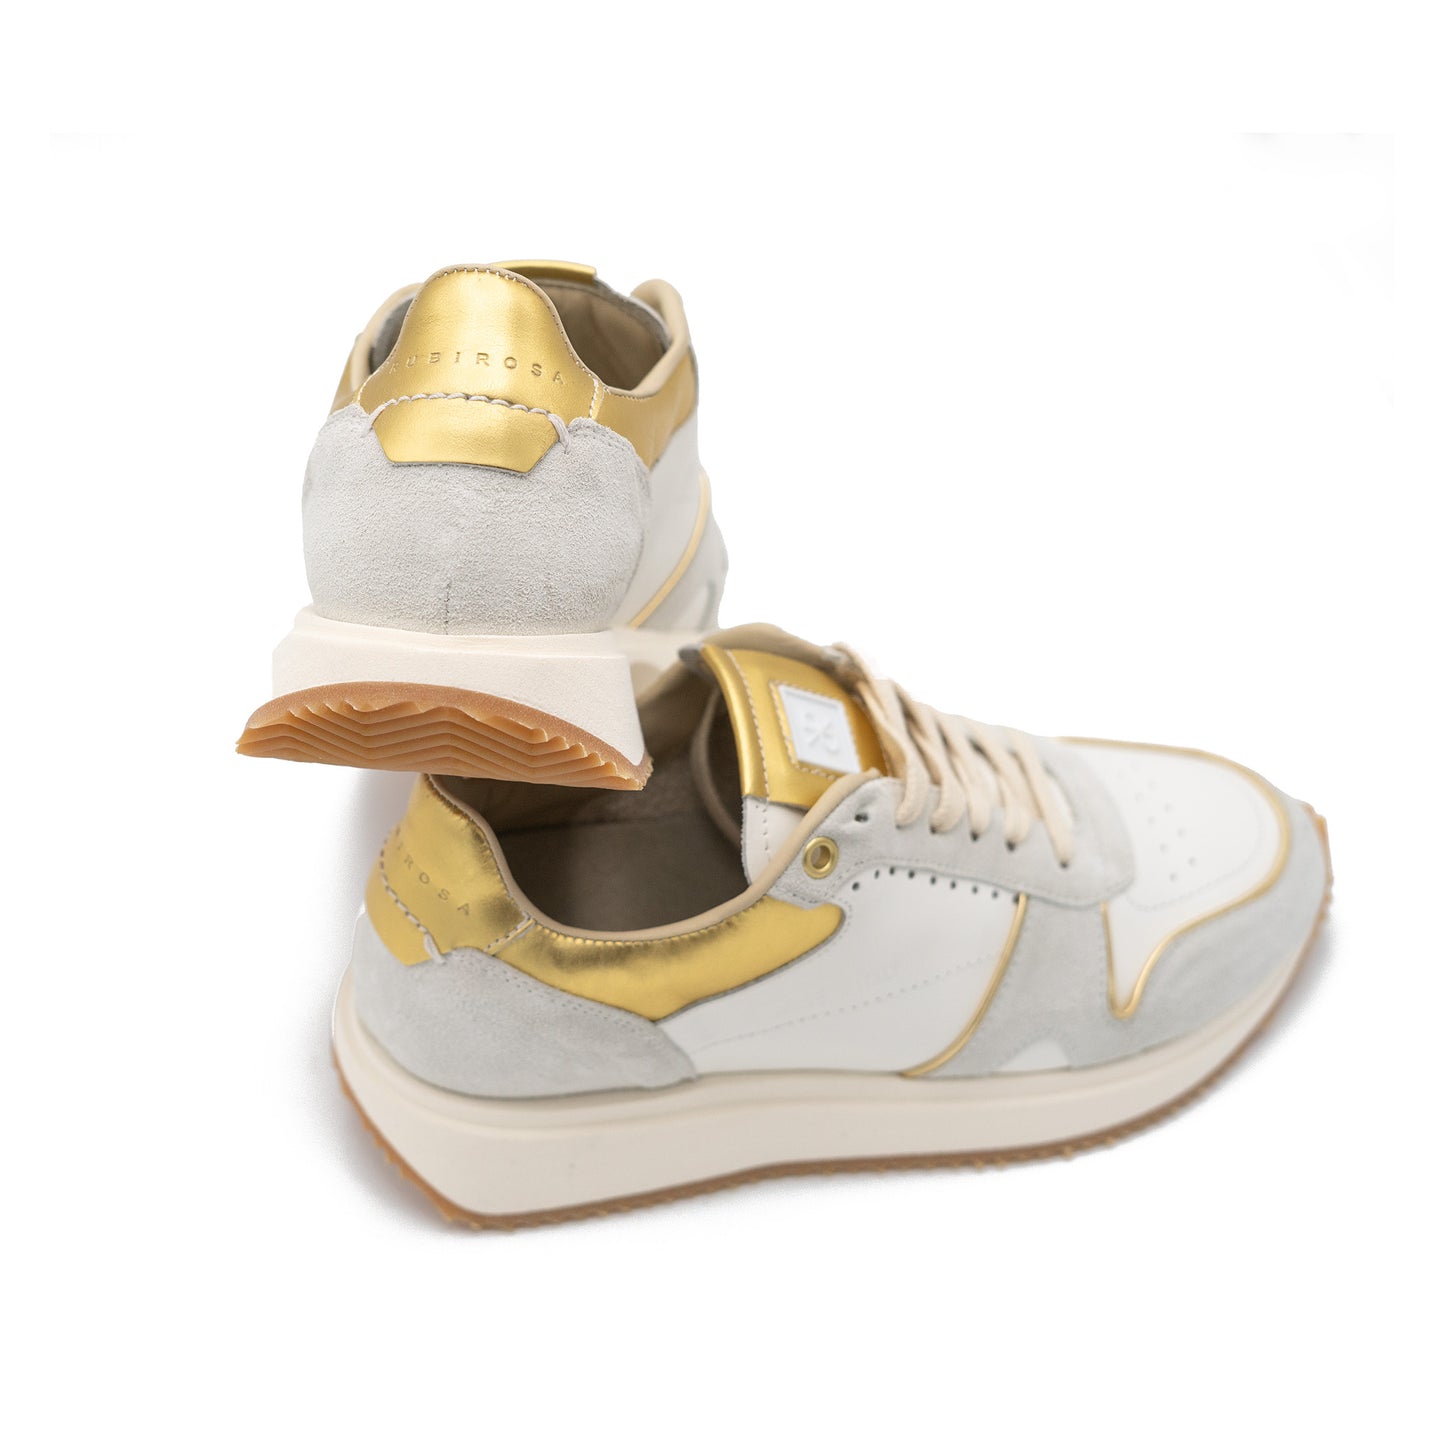 Kim D Leather Sneaker in Gold